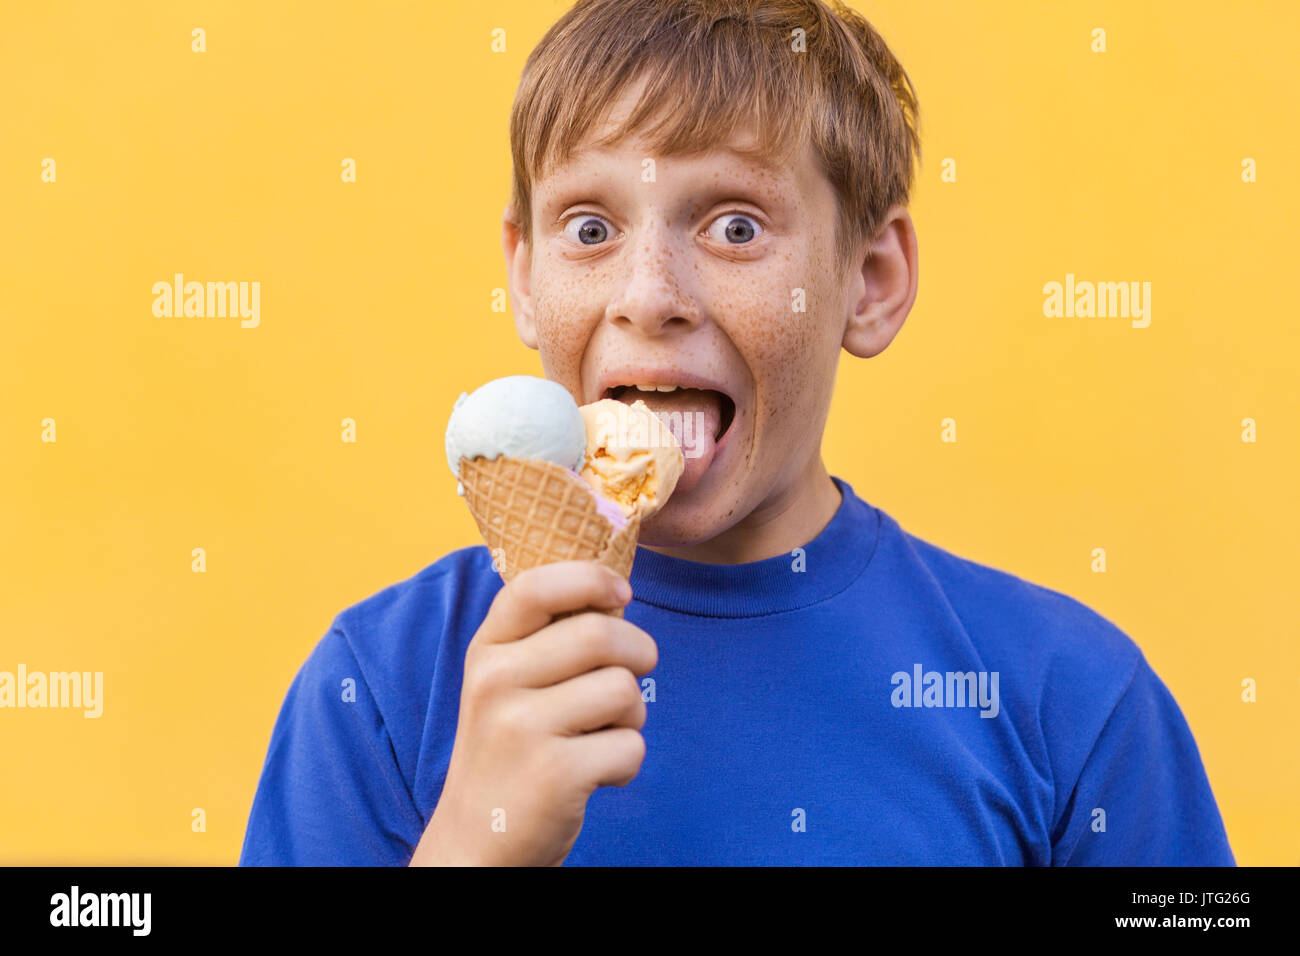 Blonde beautiful boy with freckles and blue T-shirt eating and  lickes ice cream  and looking at camera with surprised face. Studio shot, isolated on  Stock Photo